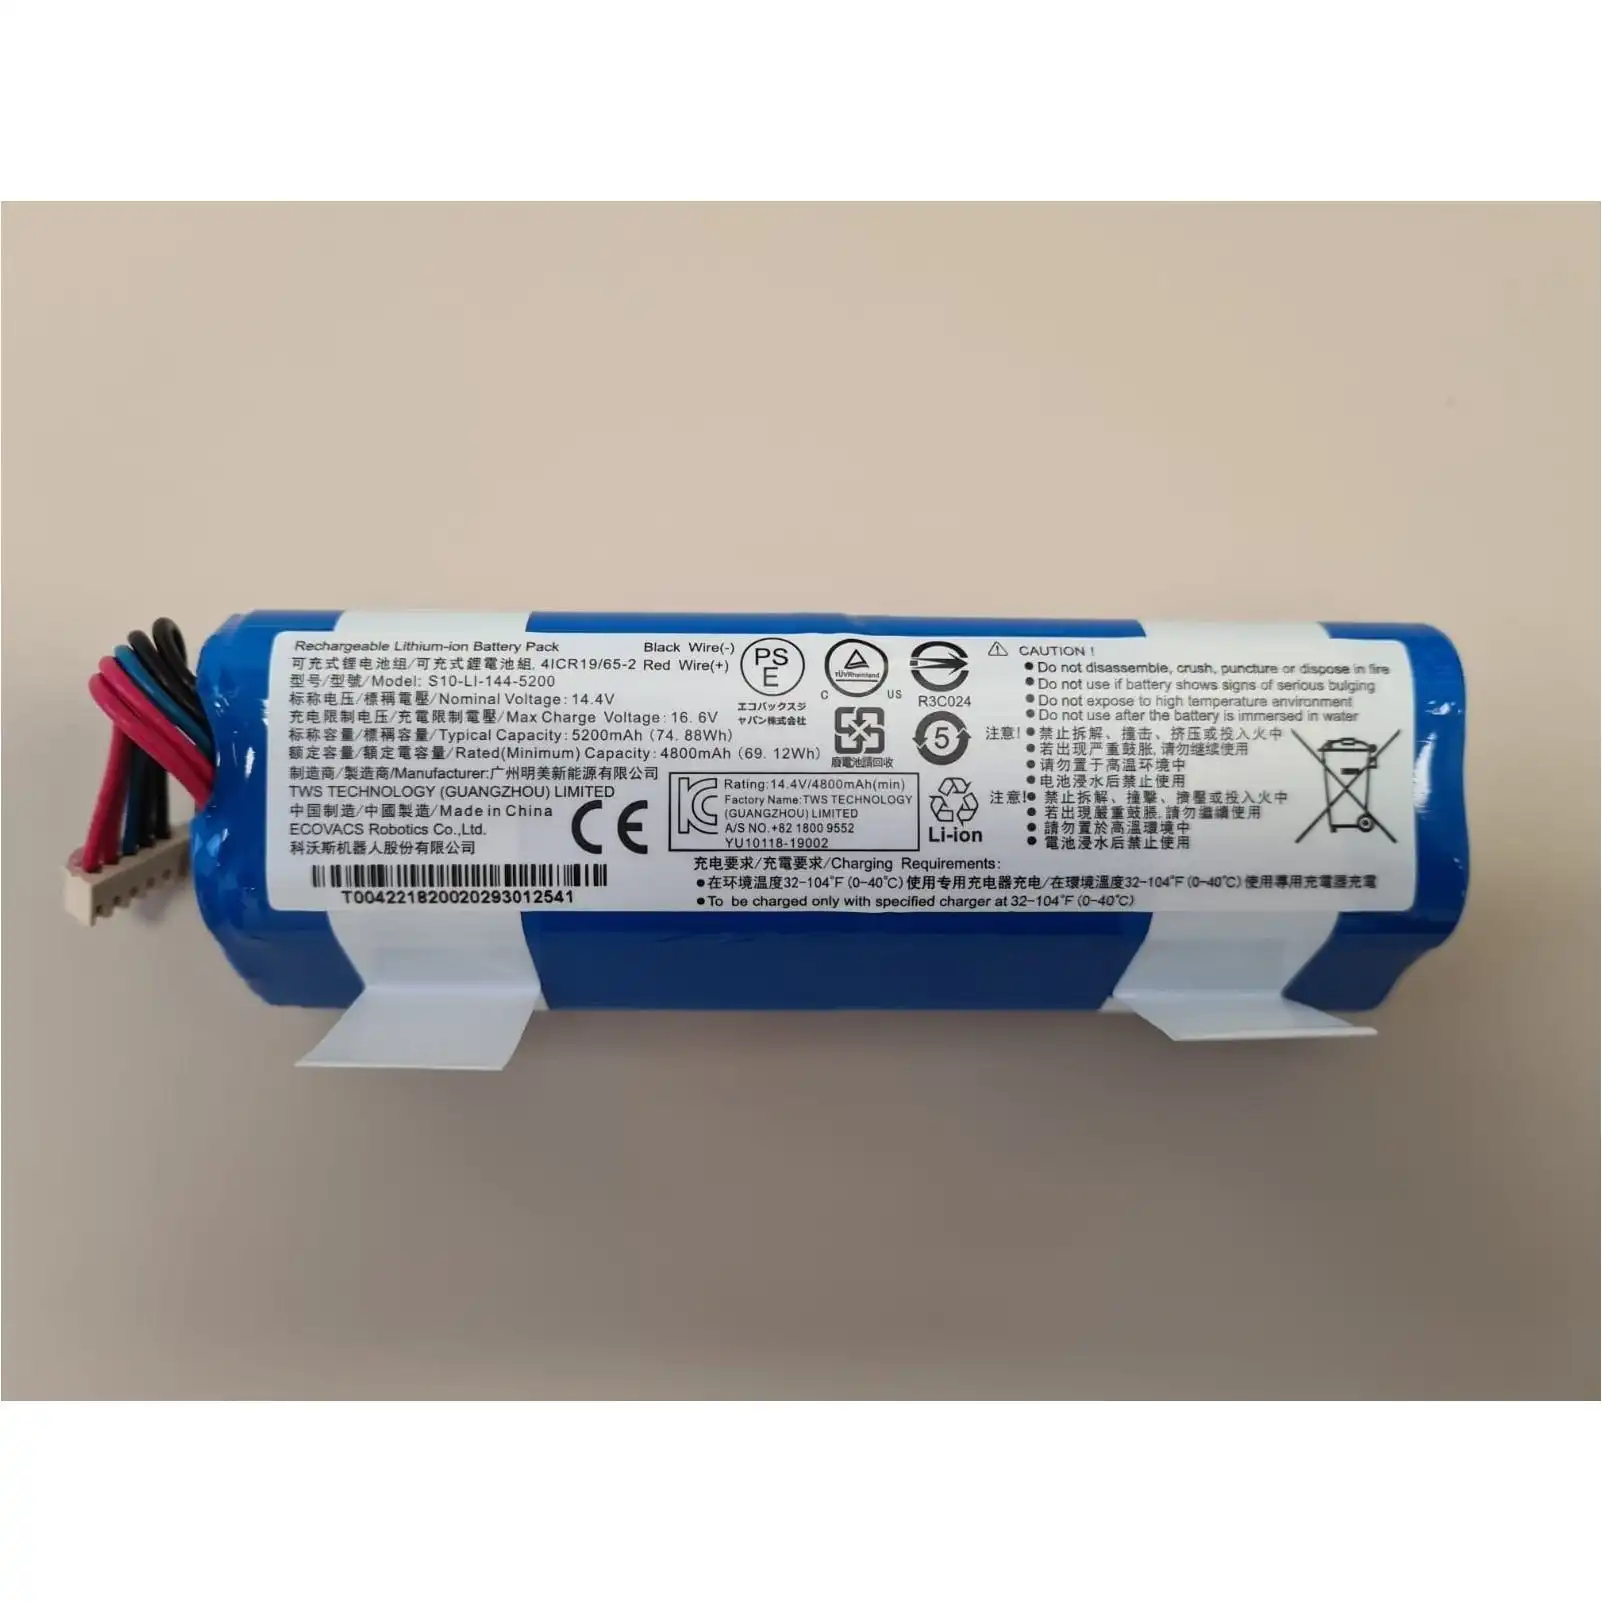 Ecovacs Deebot 950 Battery Replacement (Genuine)